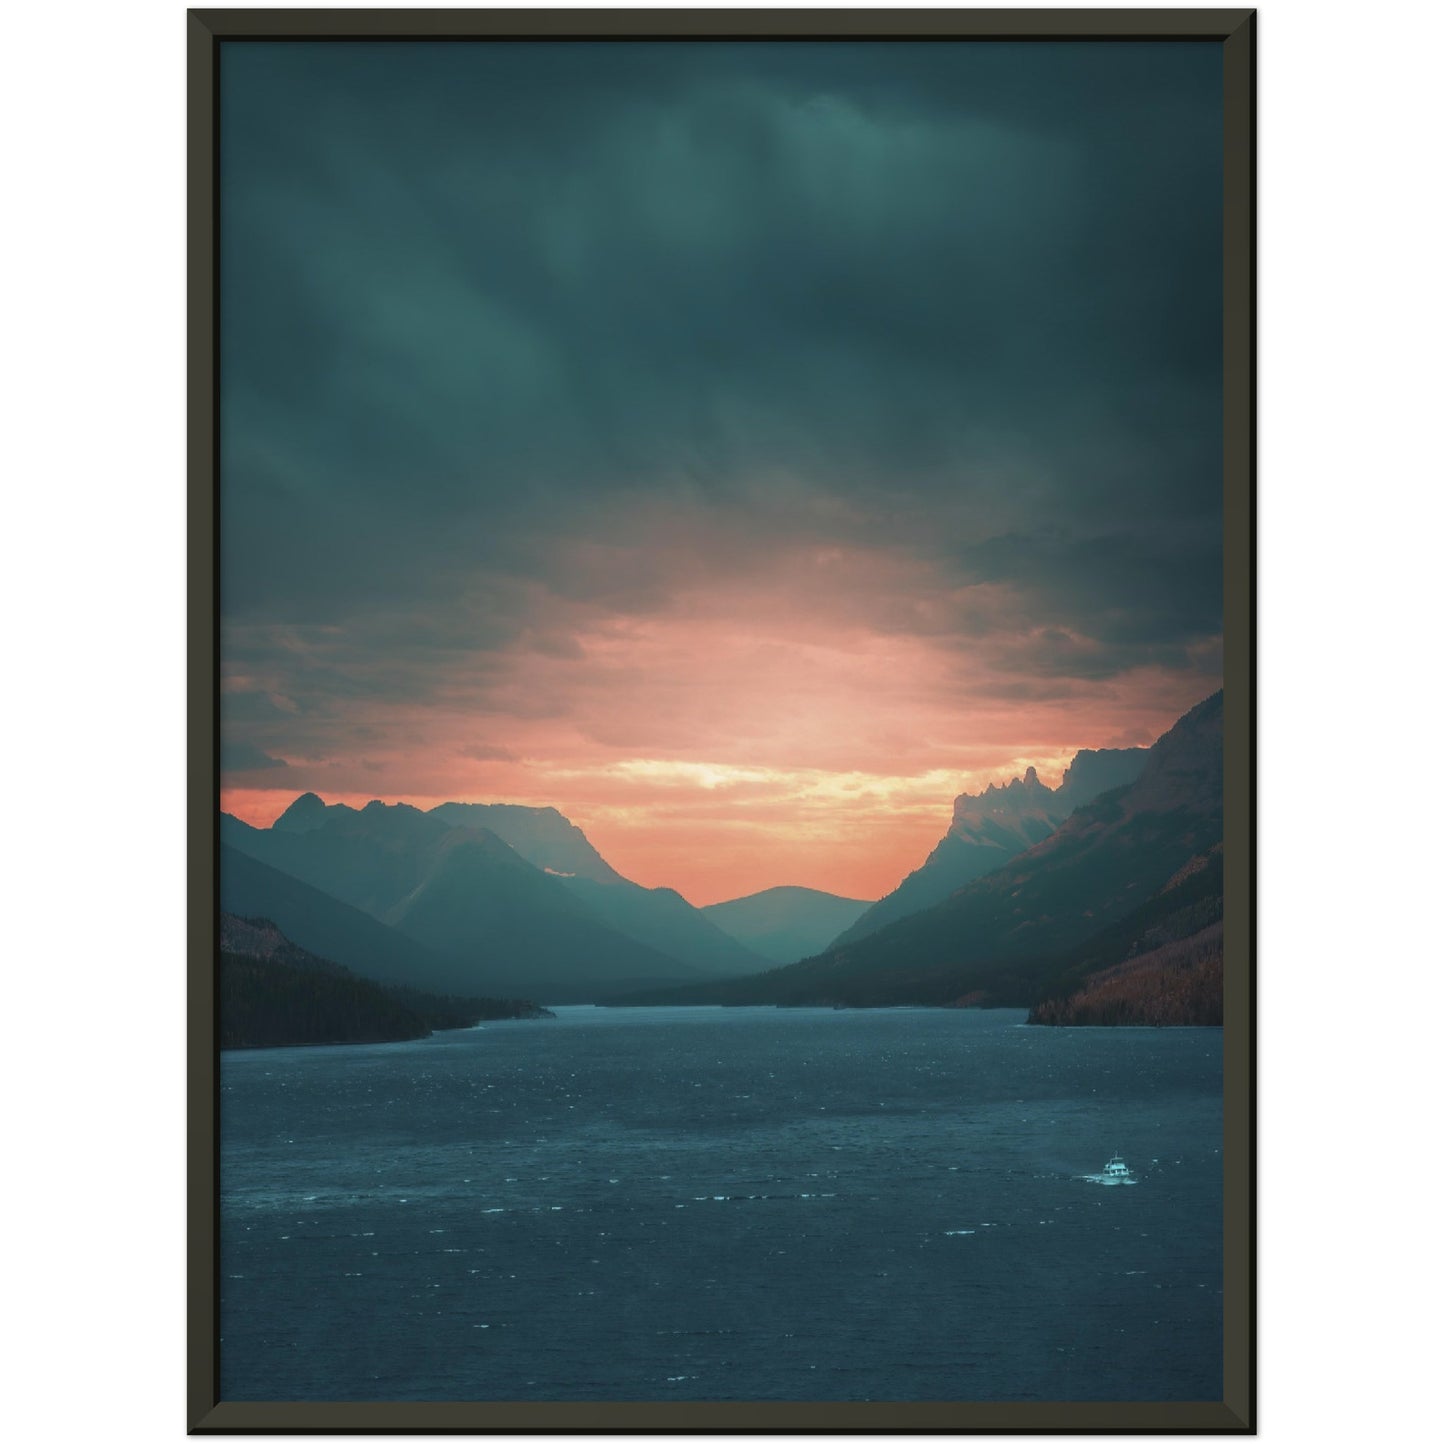 The Perfect Storm - Museum-Quality Matte Paper Metal Framed Poster